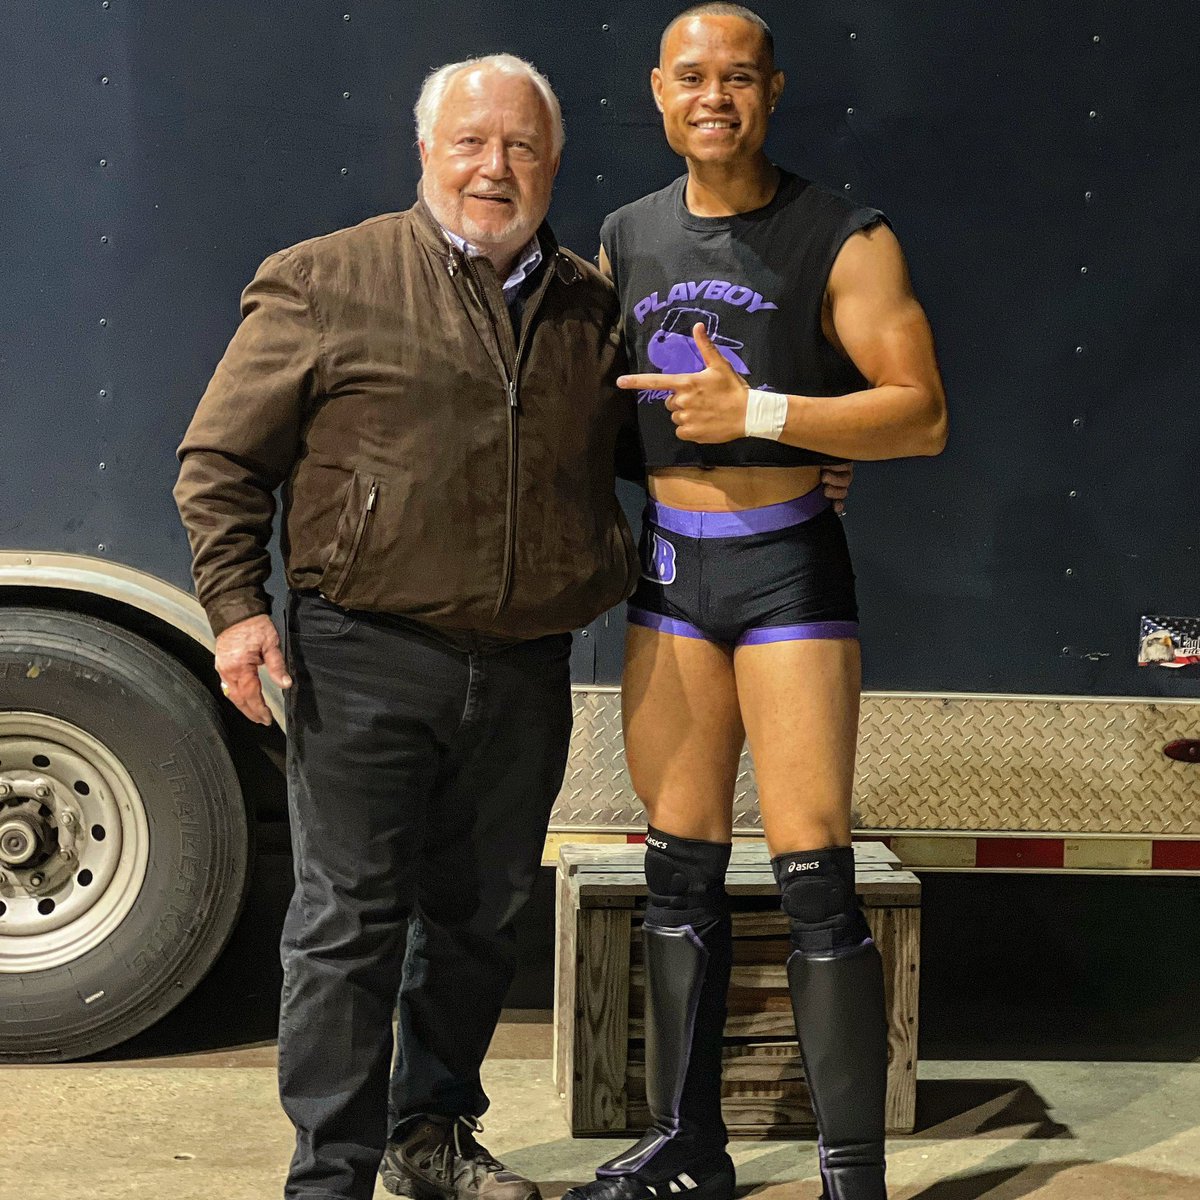 Had the pleasure of talking wrestling with a legend in the business last night! Thank you, Mr. David Crockett! 💪🏽🔥 #ImpactPlayer #MoodShifter #CYNProject #ProWrestling #ProWrestler #WrestlingLegends #DavidCrockett #JimCrockettPromotions #TerritoryDays #PlayboyAlexBryant